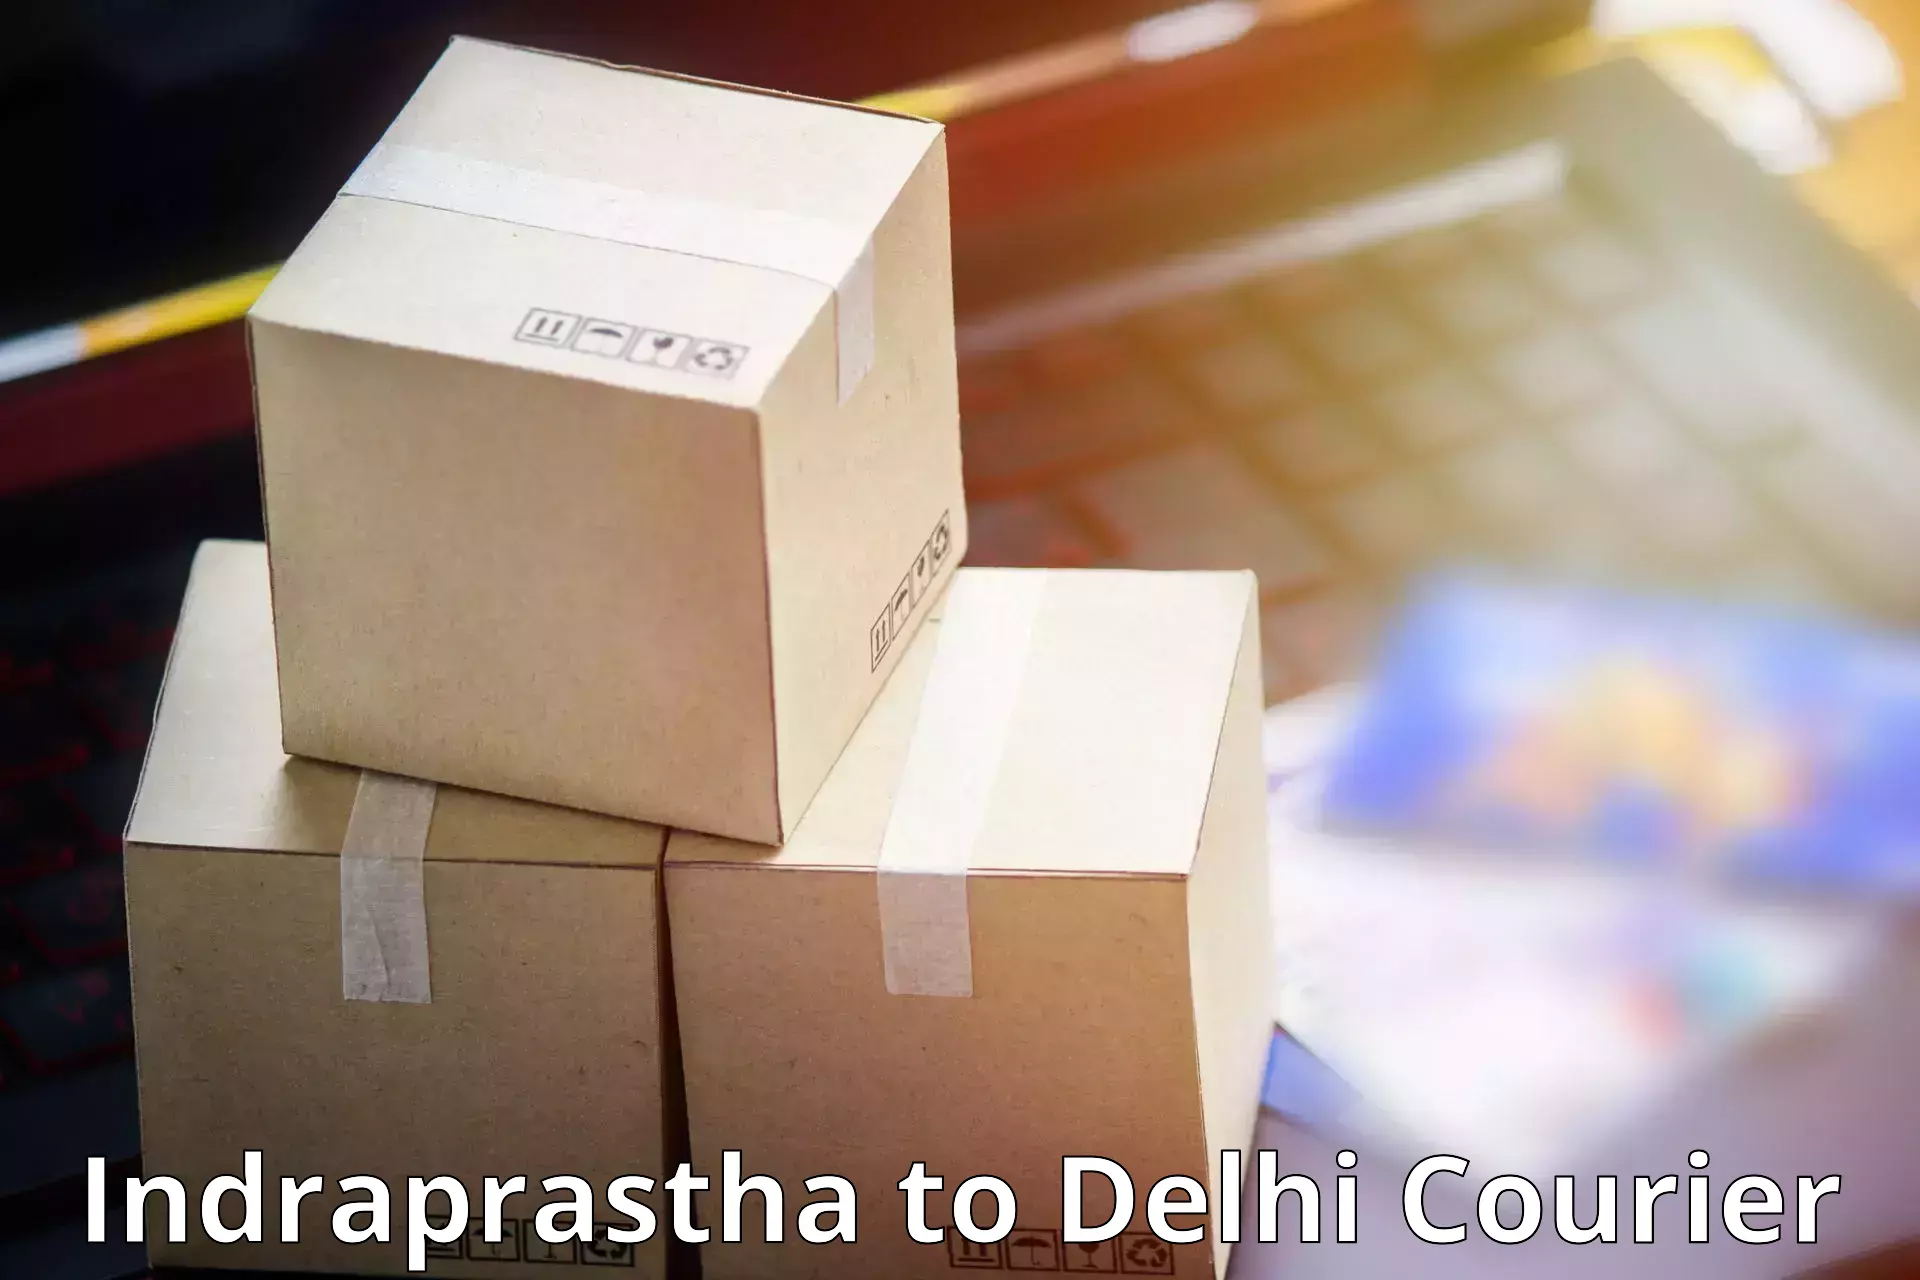 High-capacity parcel service Indraprastha to NCR